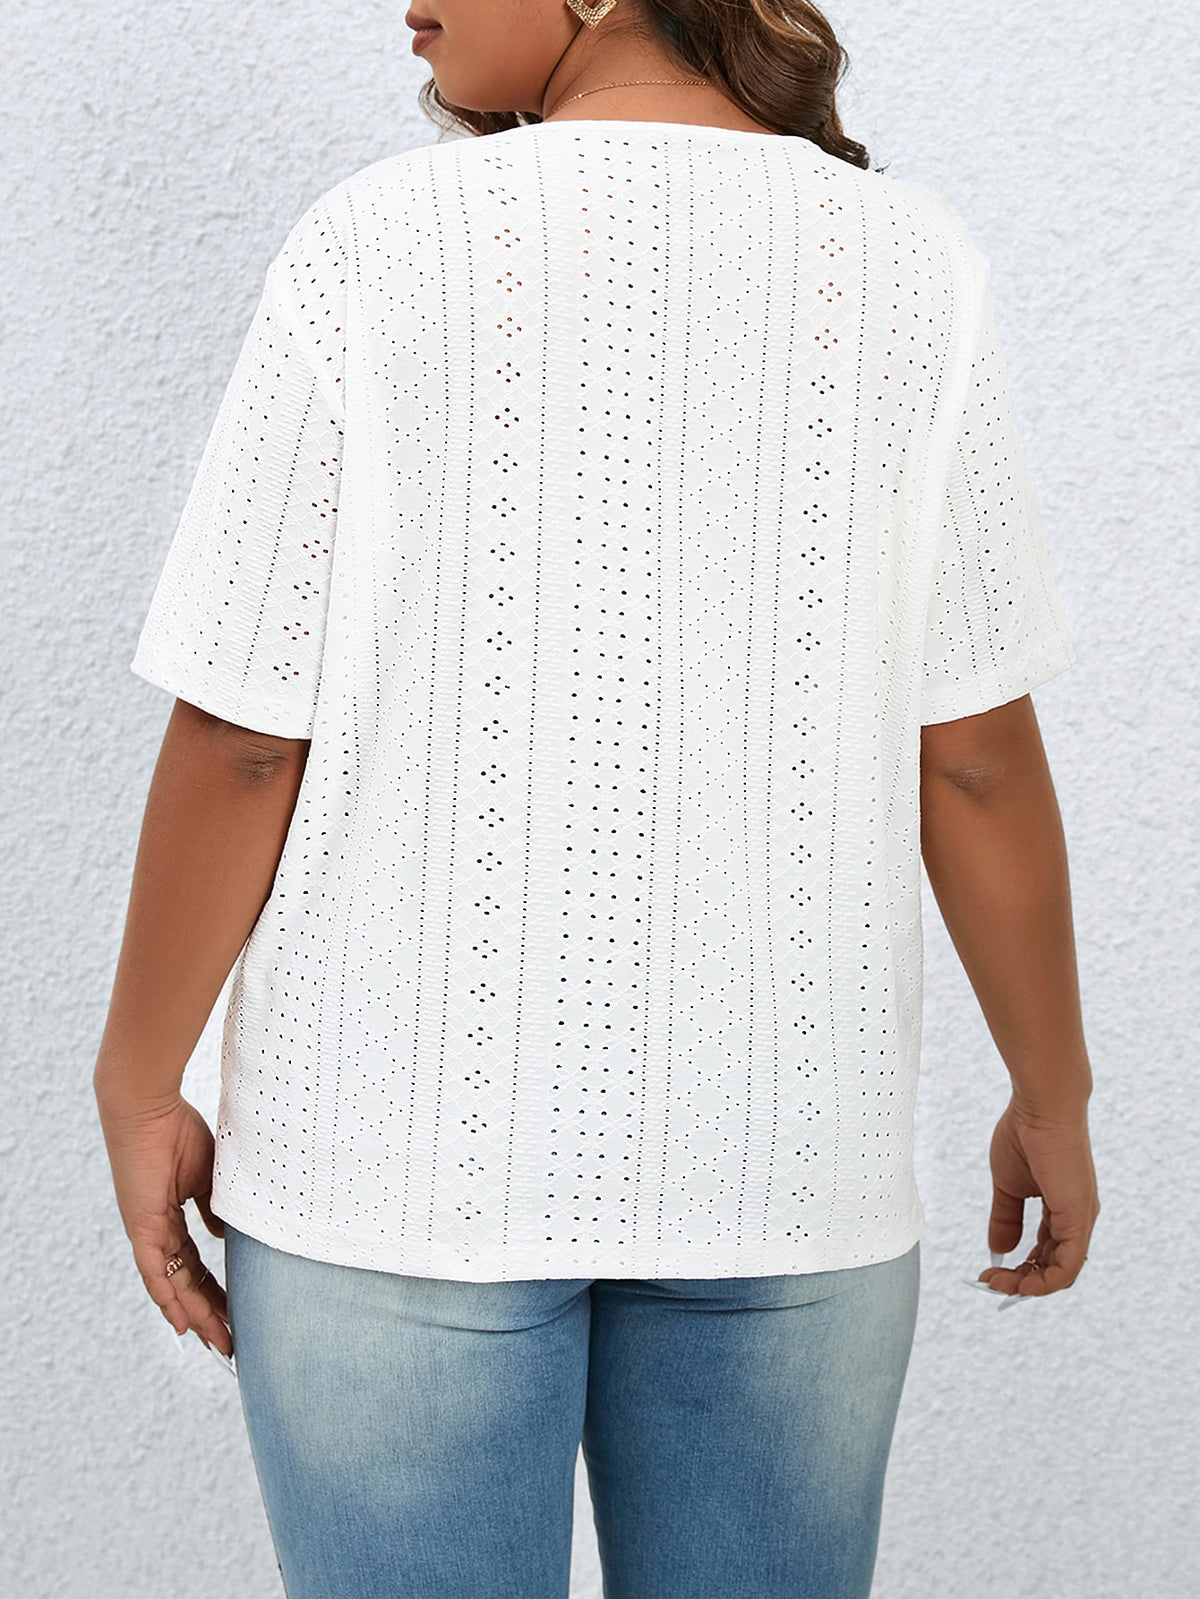 Plus Eyelet Embroidery Tee with Button Front